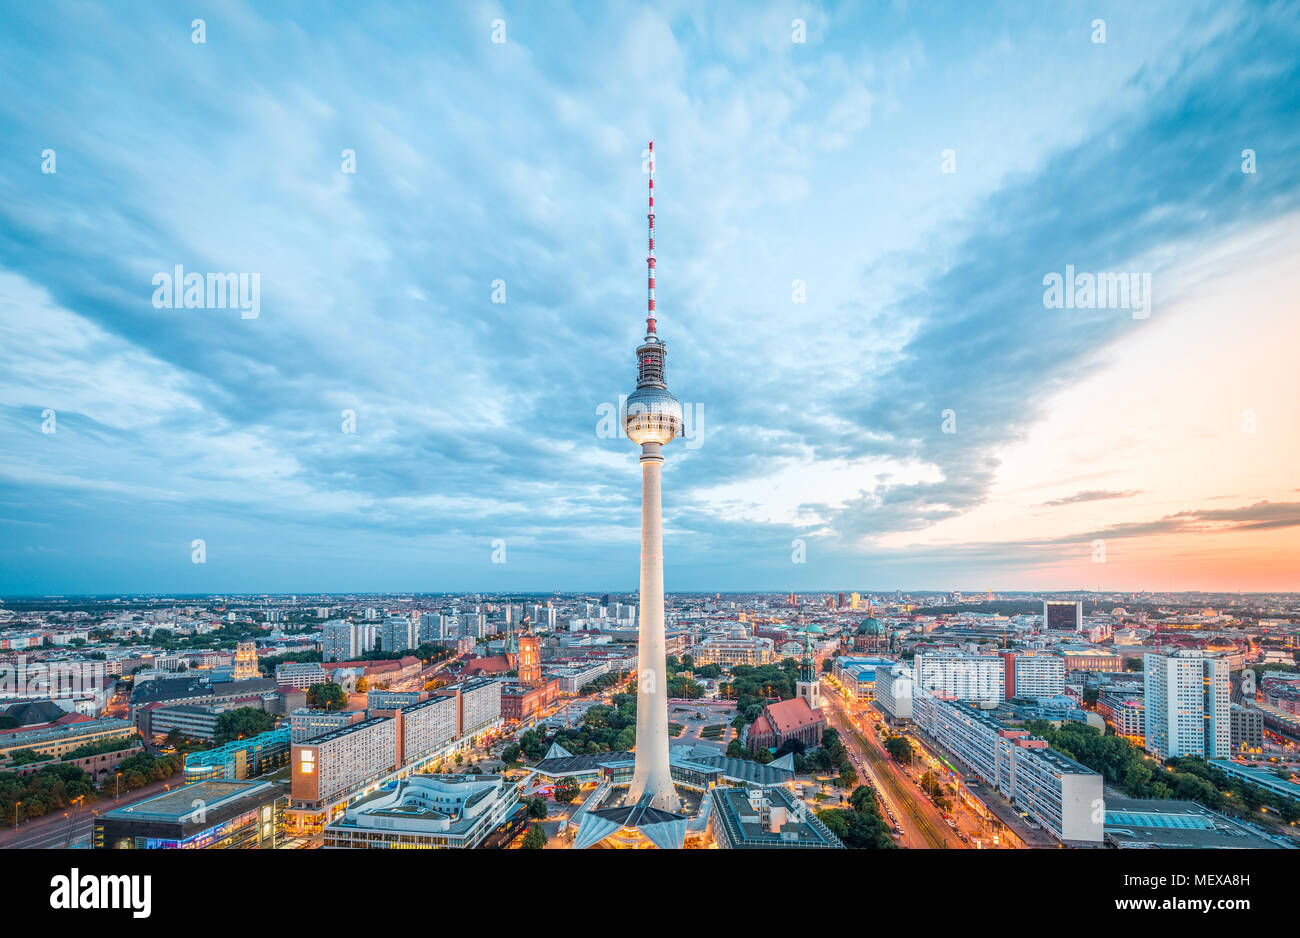 Aerial view of Berlin skyline with famous TV tower at Alexanderplatz and dramatic cloudscape in twilight during blue hour at dusk, Germany Stock Photo